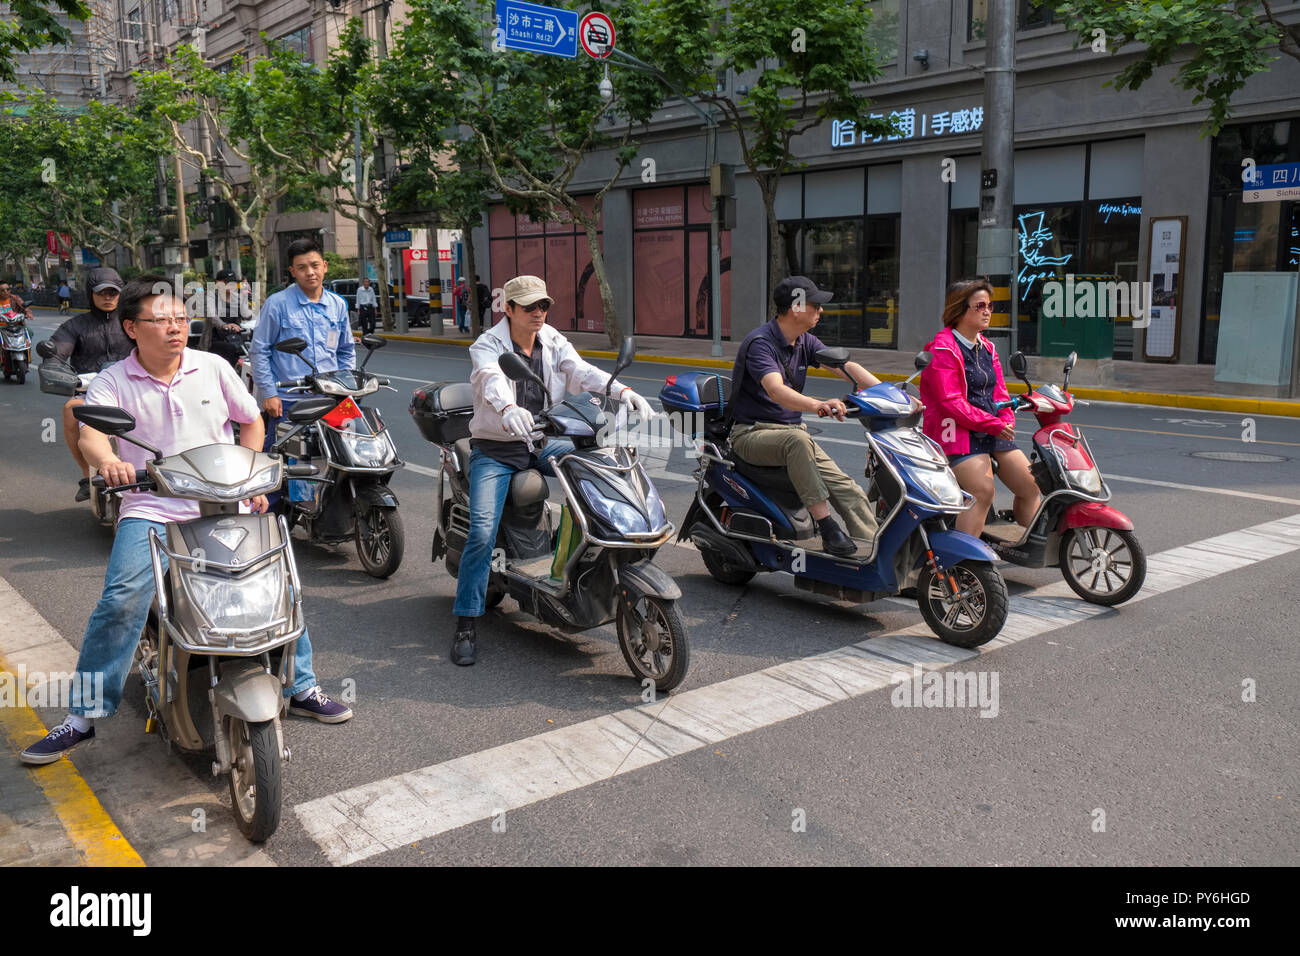 Group of people riding scooters in a street in Shanghai, China, Asia Stock Photo